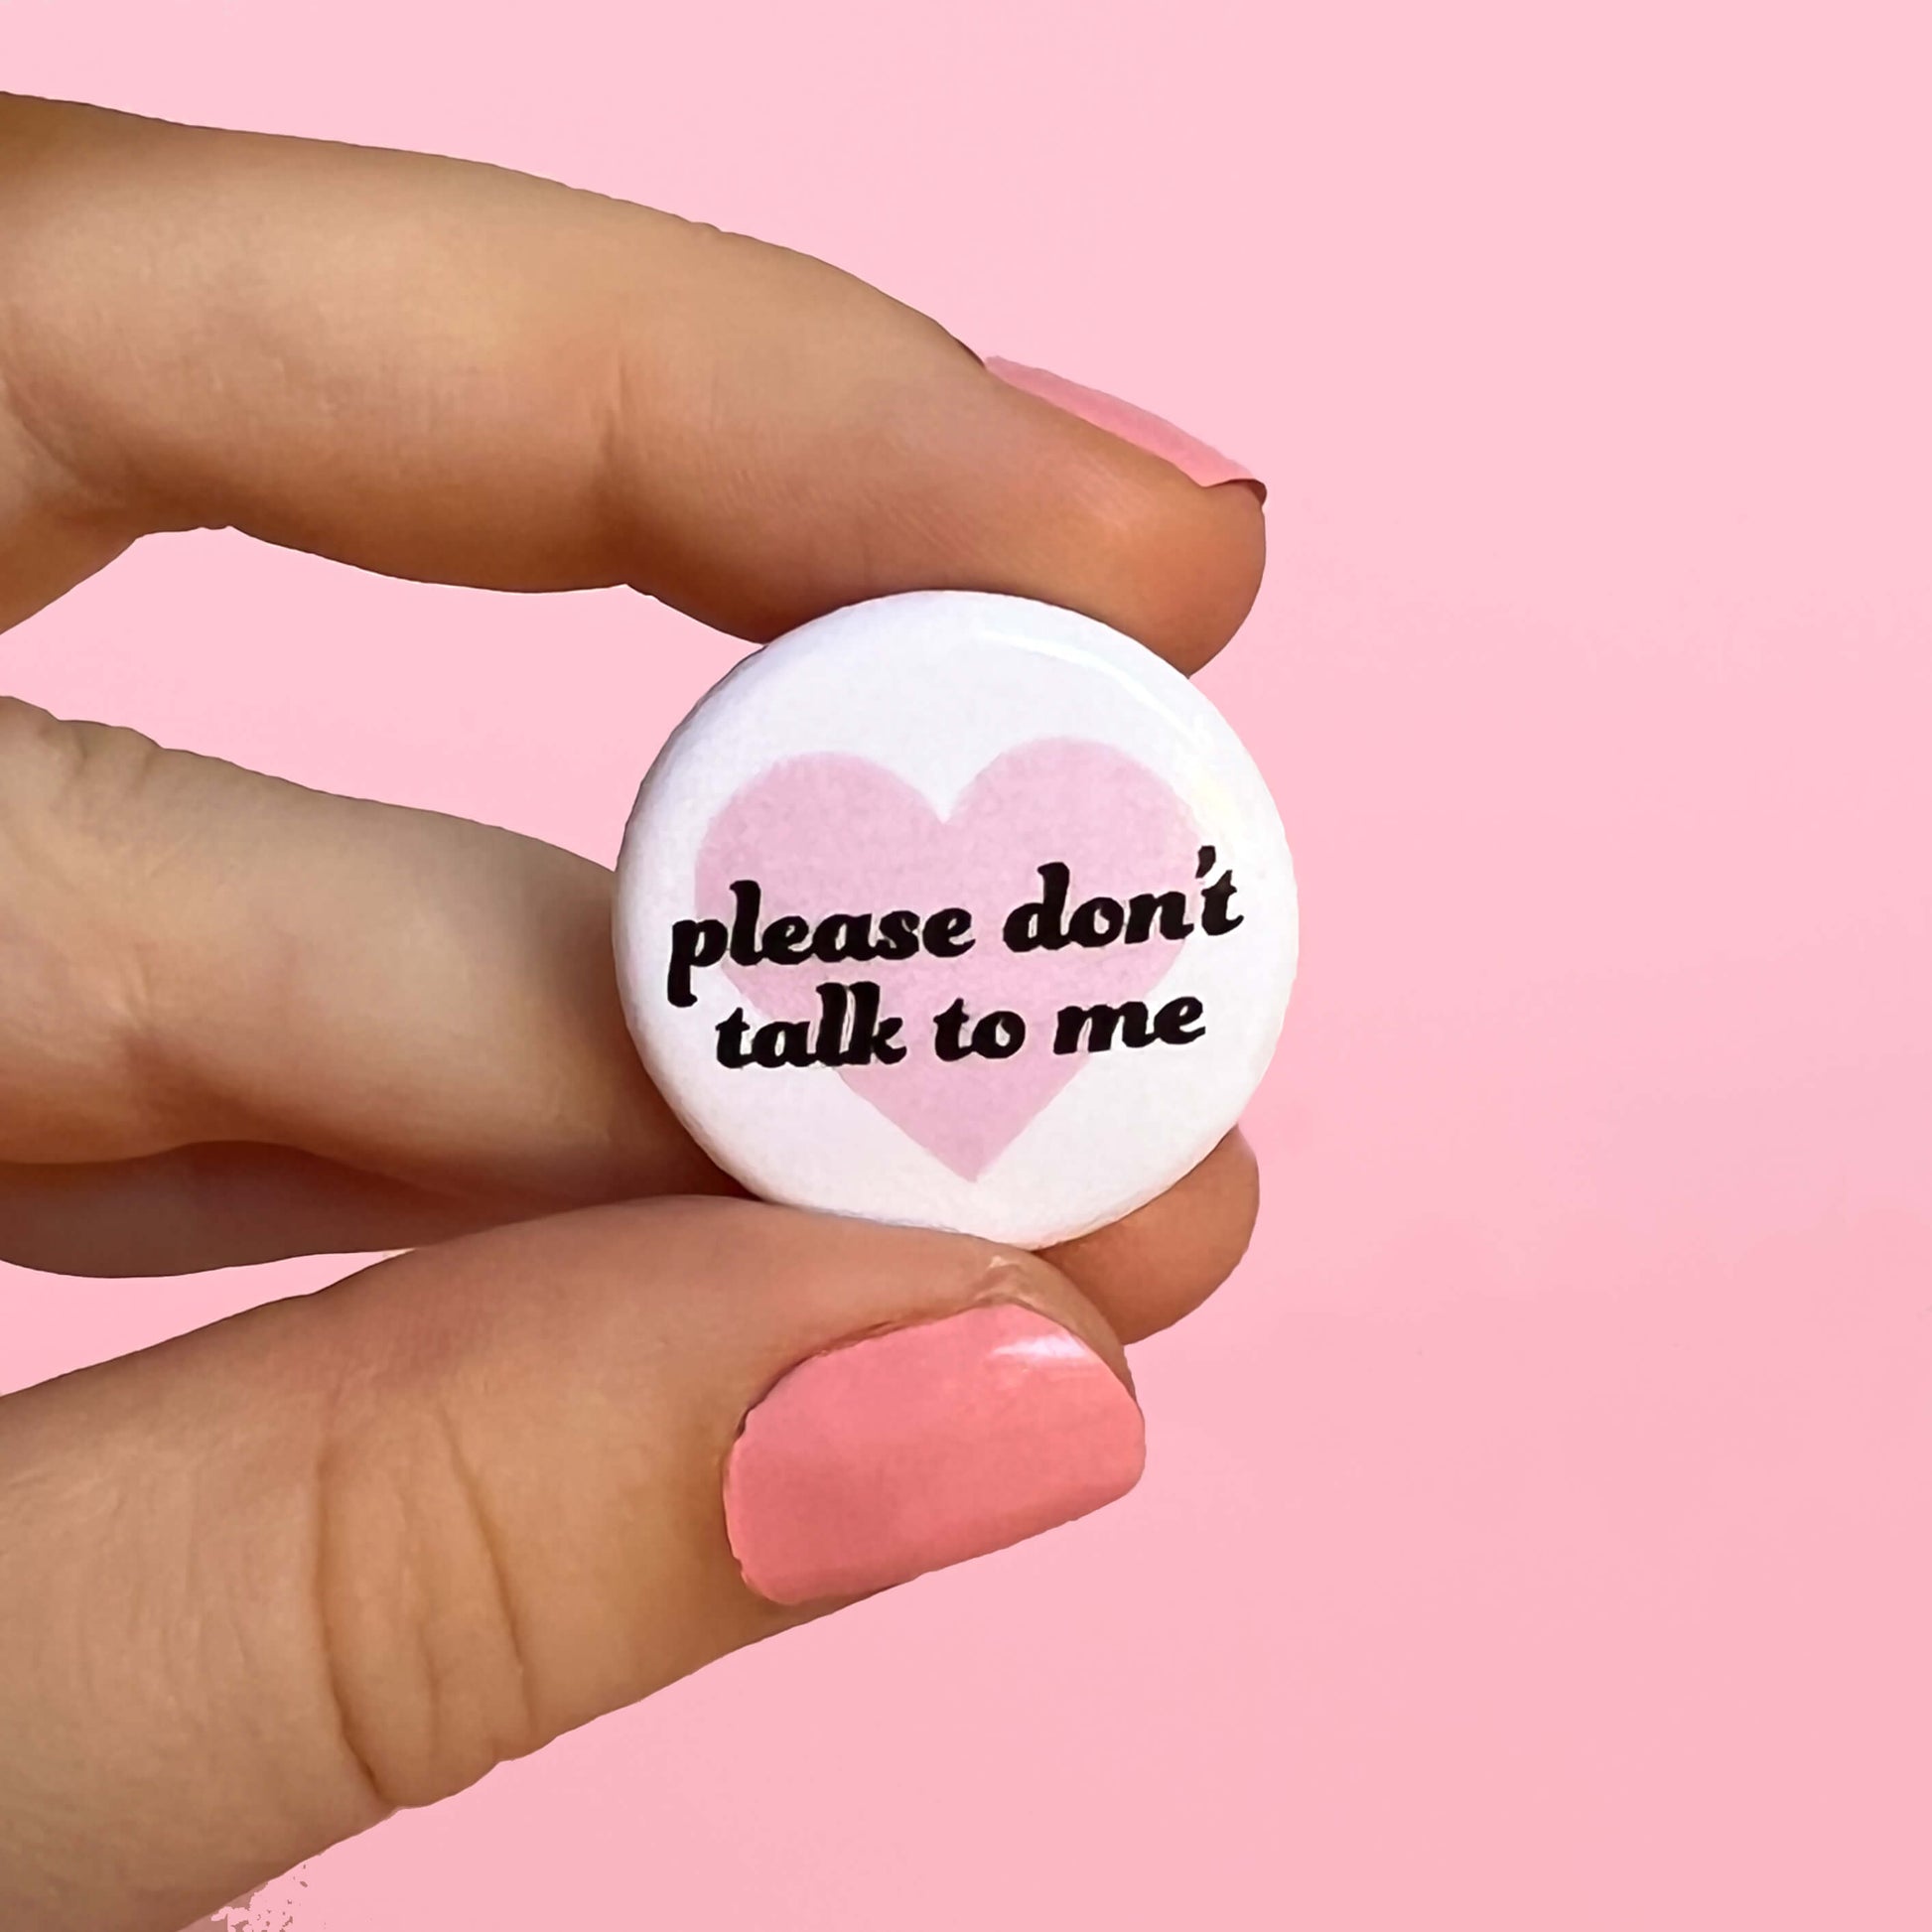 white and pink button "please don't talk to me"